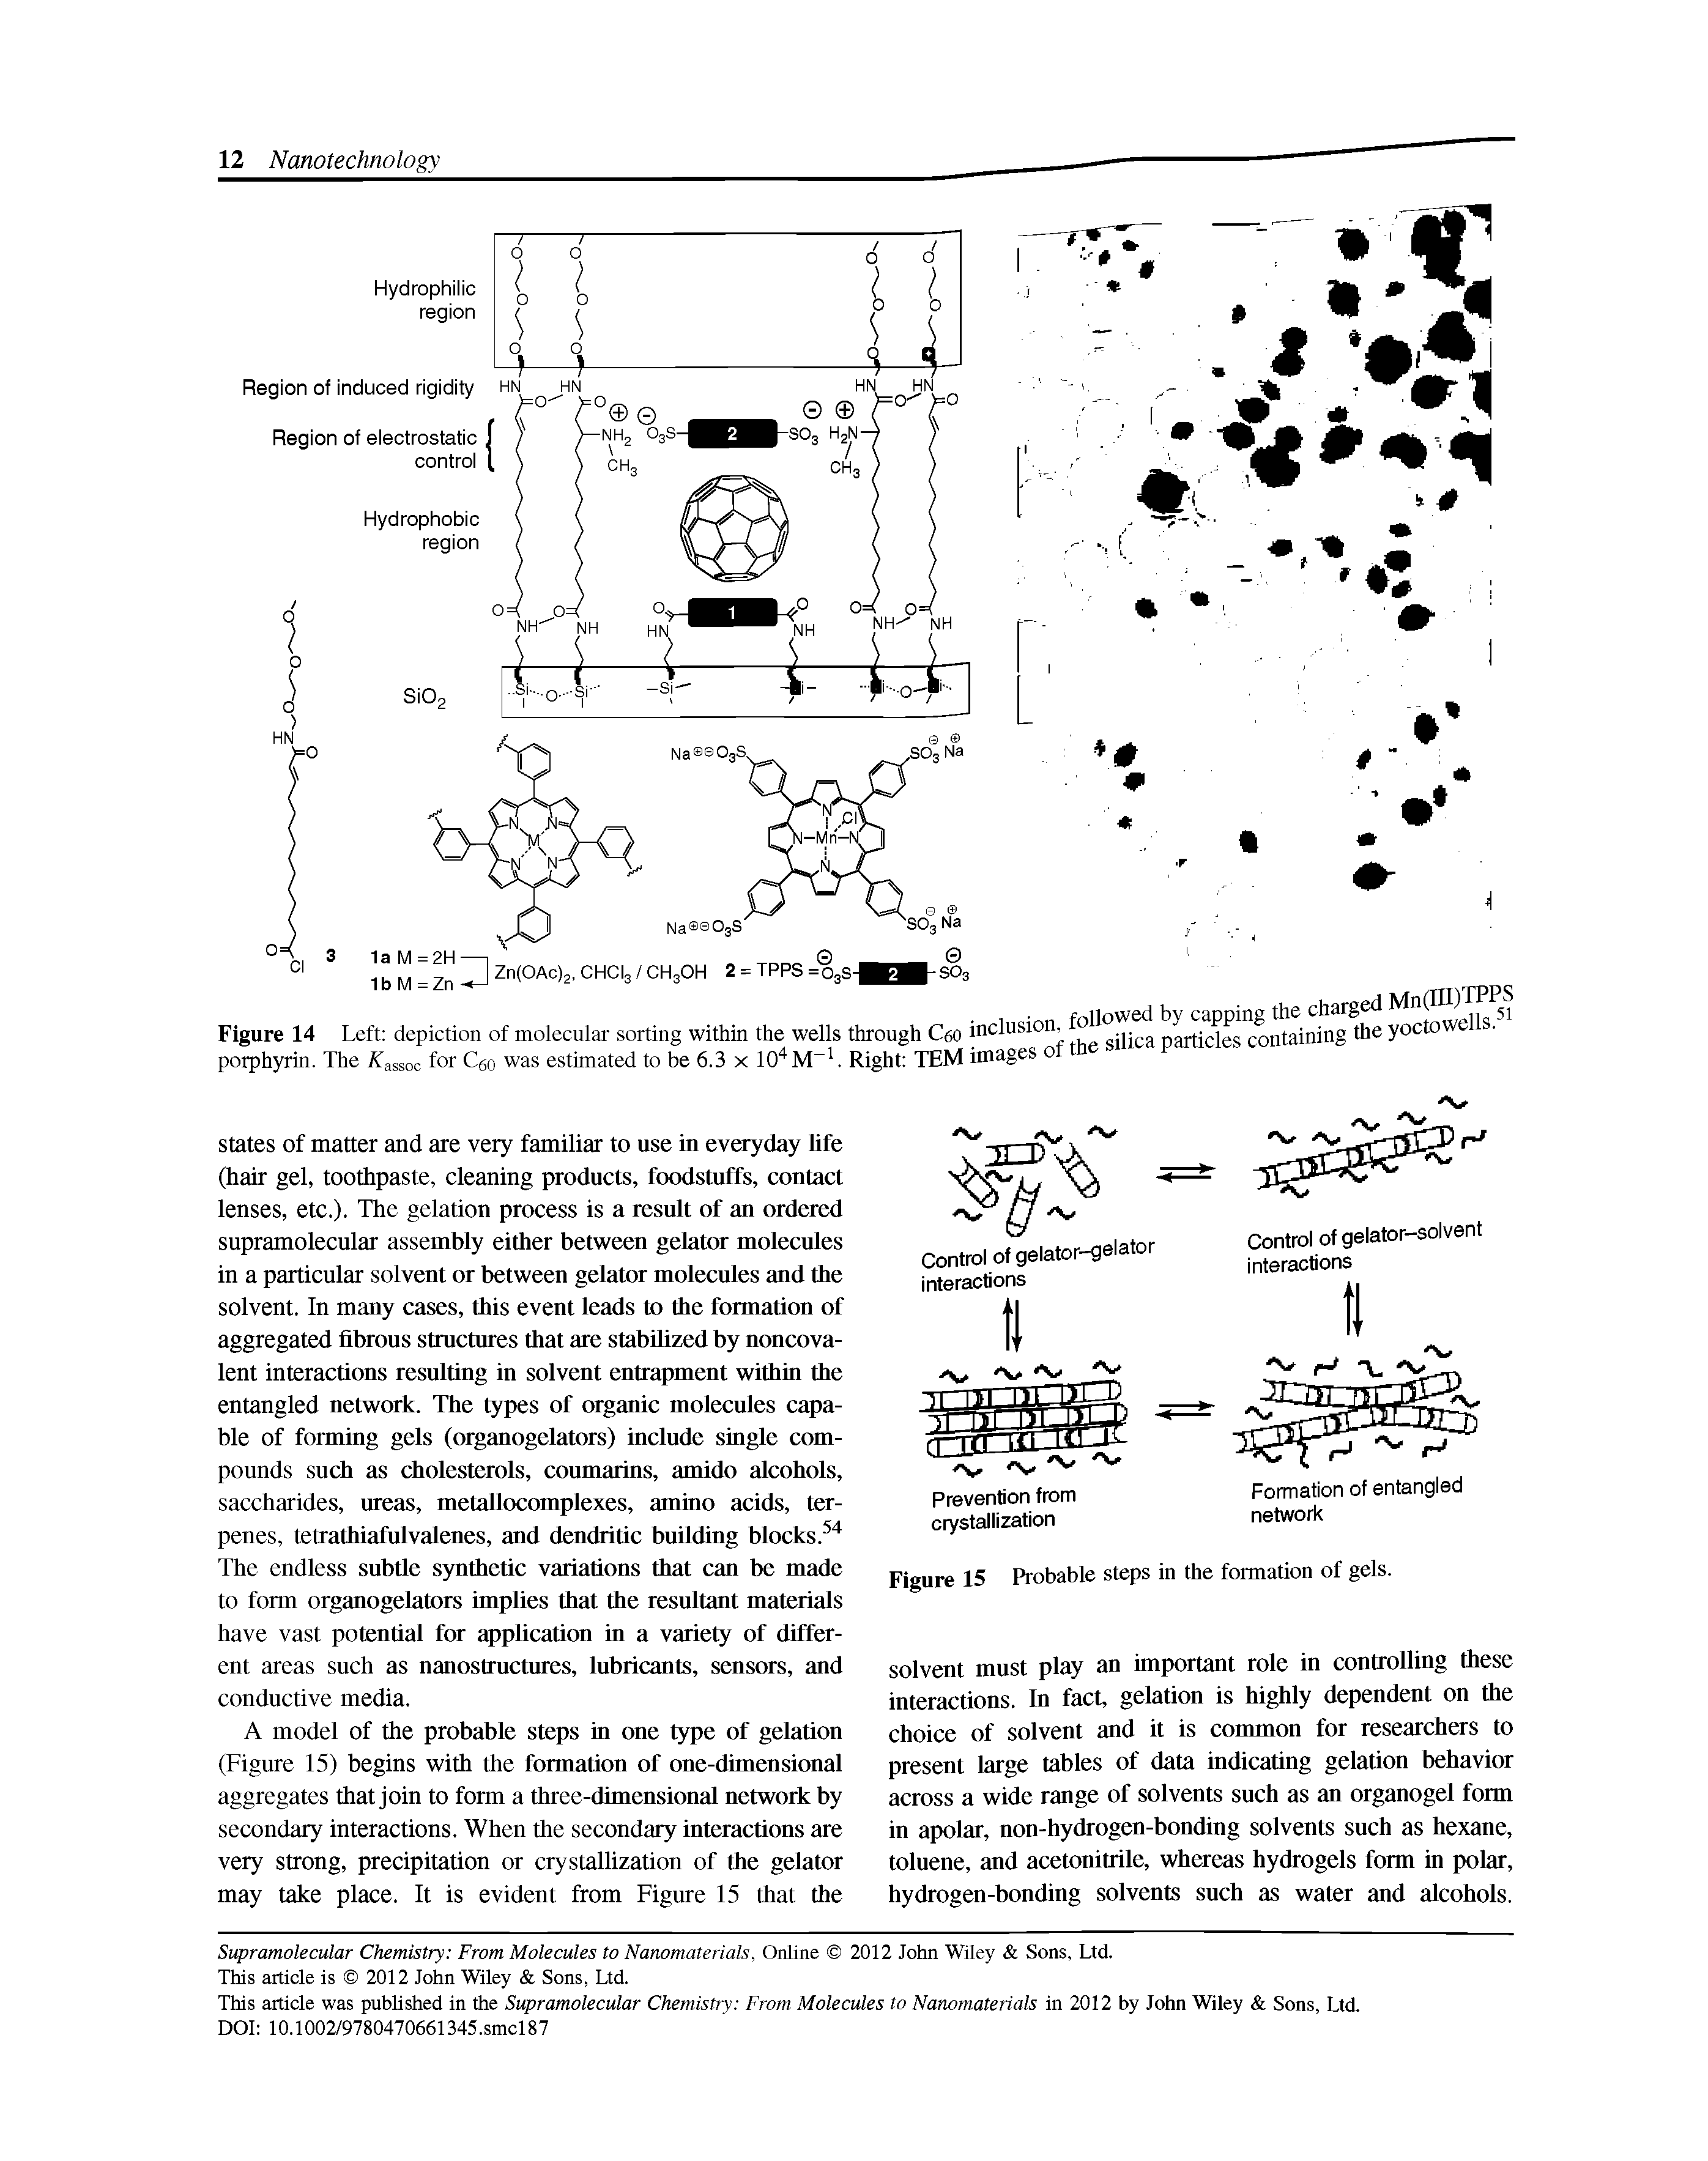 Figure 14 Left depiction of molecular sorting within the wells through Ceo inclusion, mrrirW rontaining e yoctowells. i...